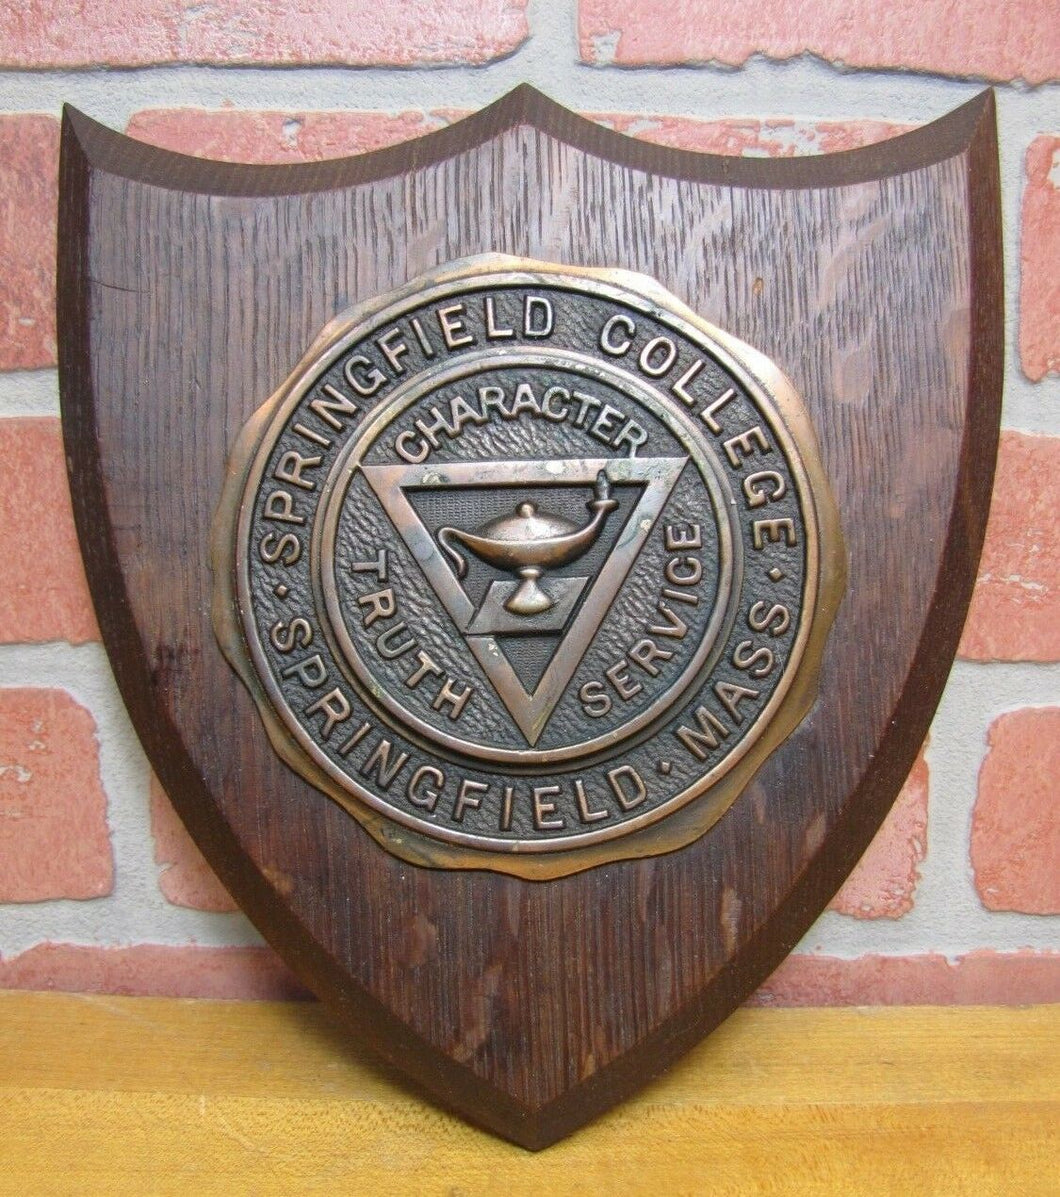 Old SPRINGFIELD COLLEGE MASS Plaque Sign CHARACTER TRUTH SERVICE Wood Metal